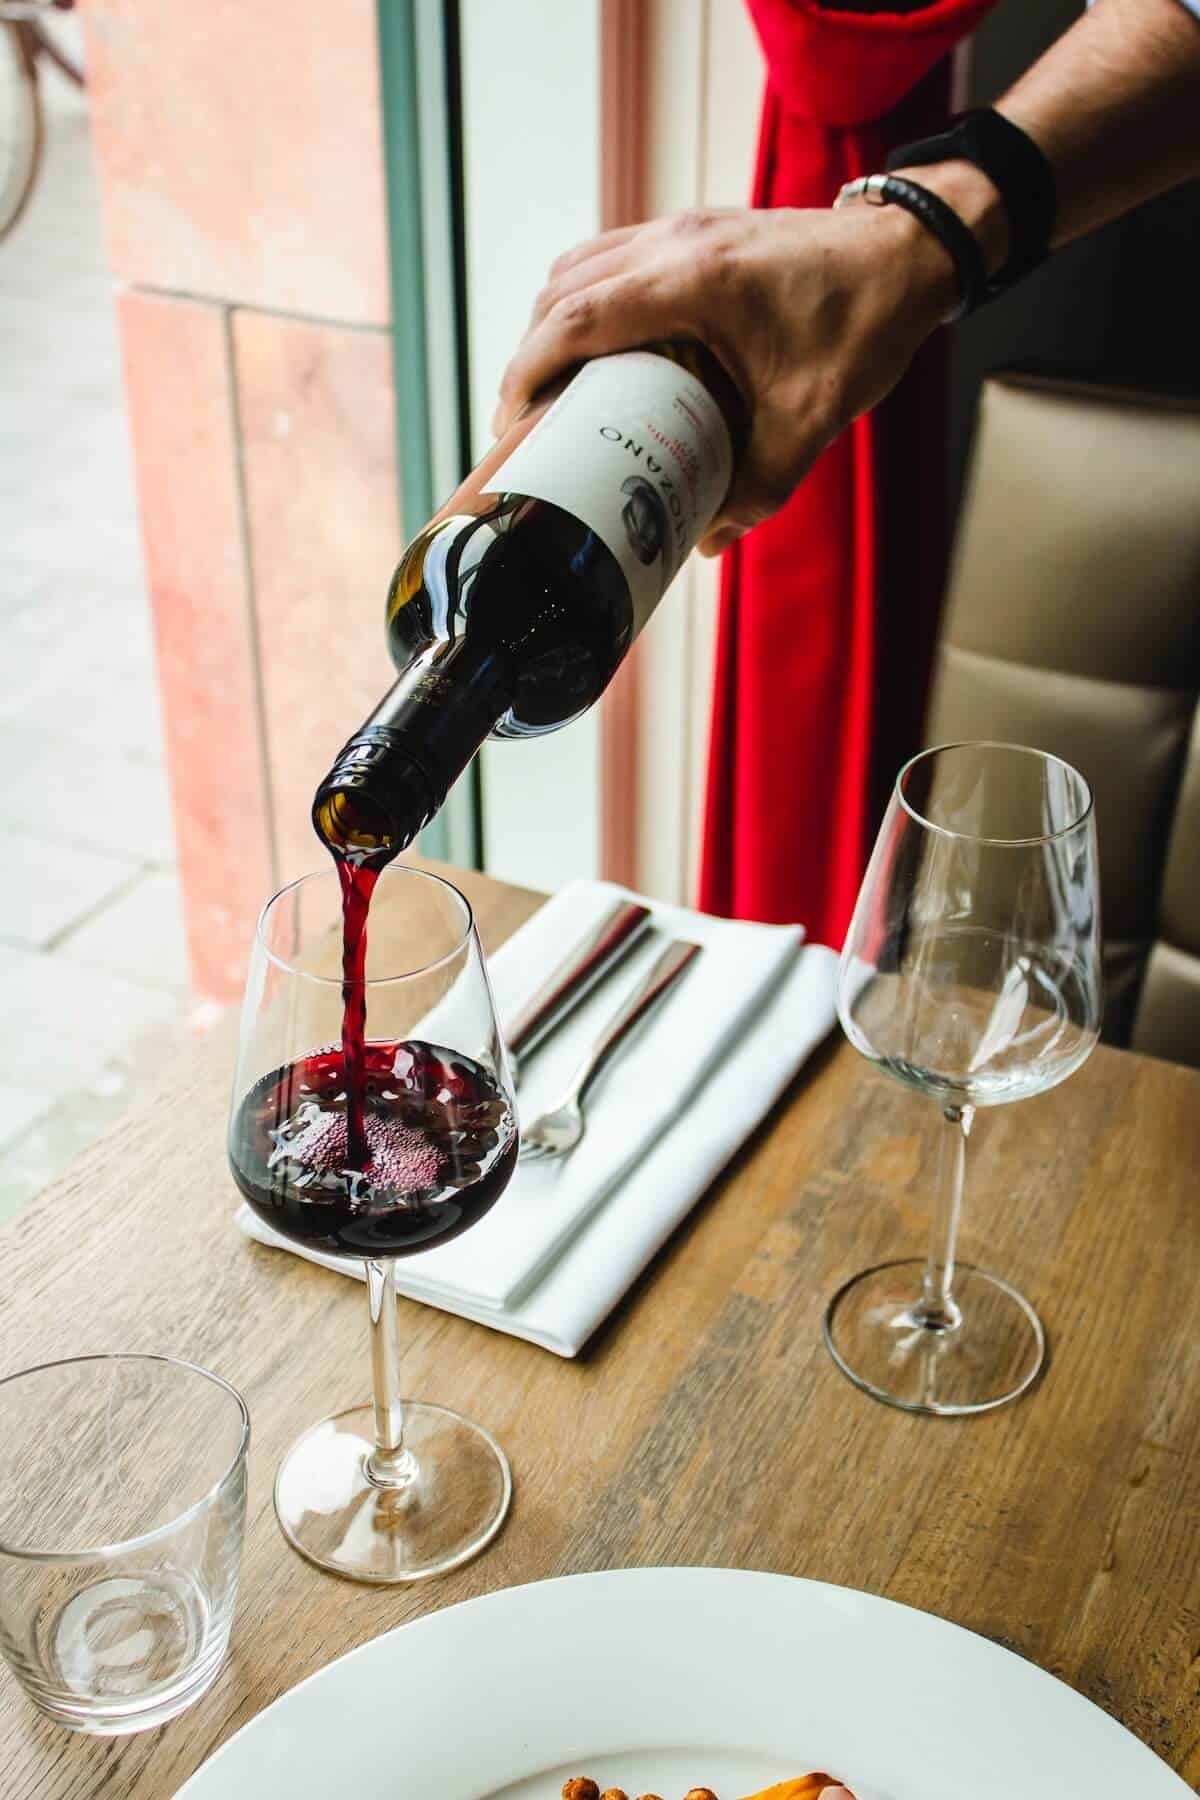 A glass of wine being poured.